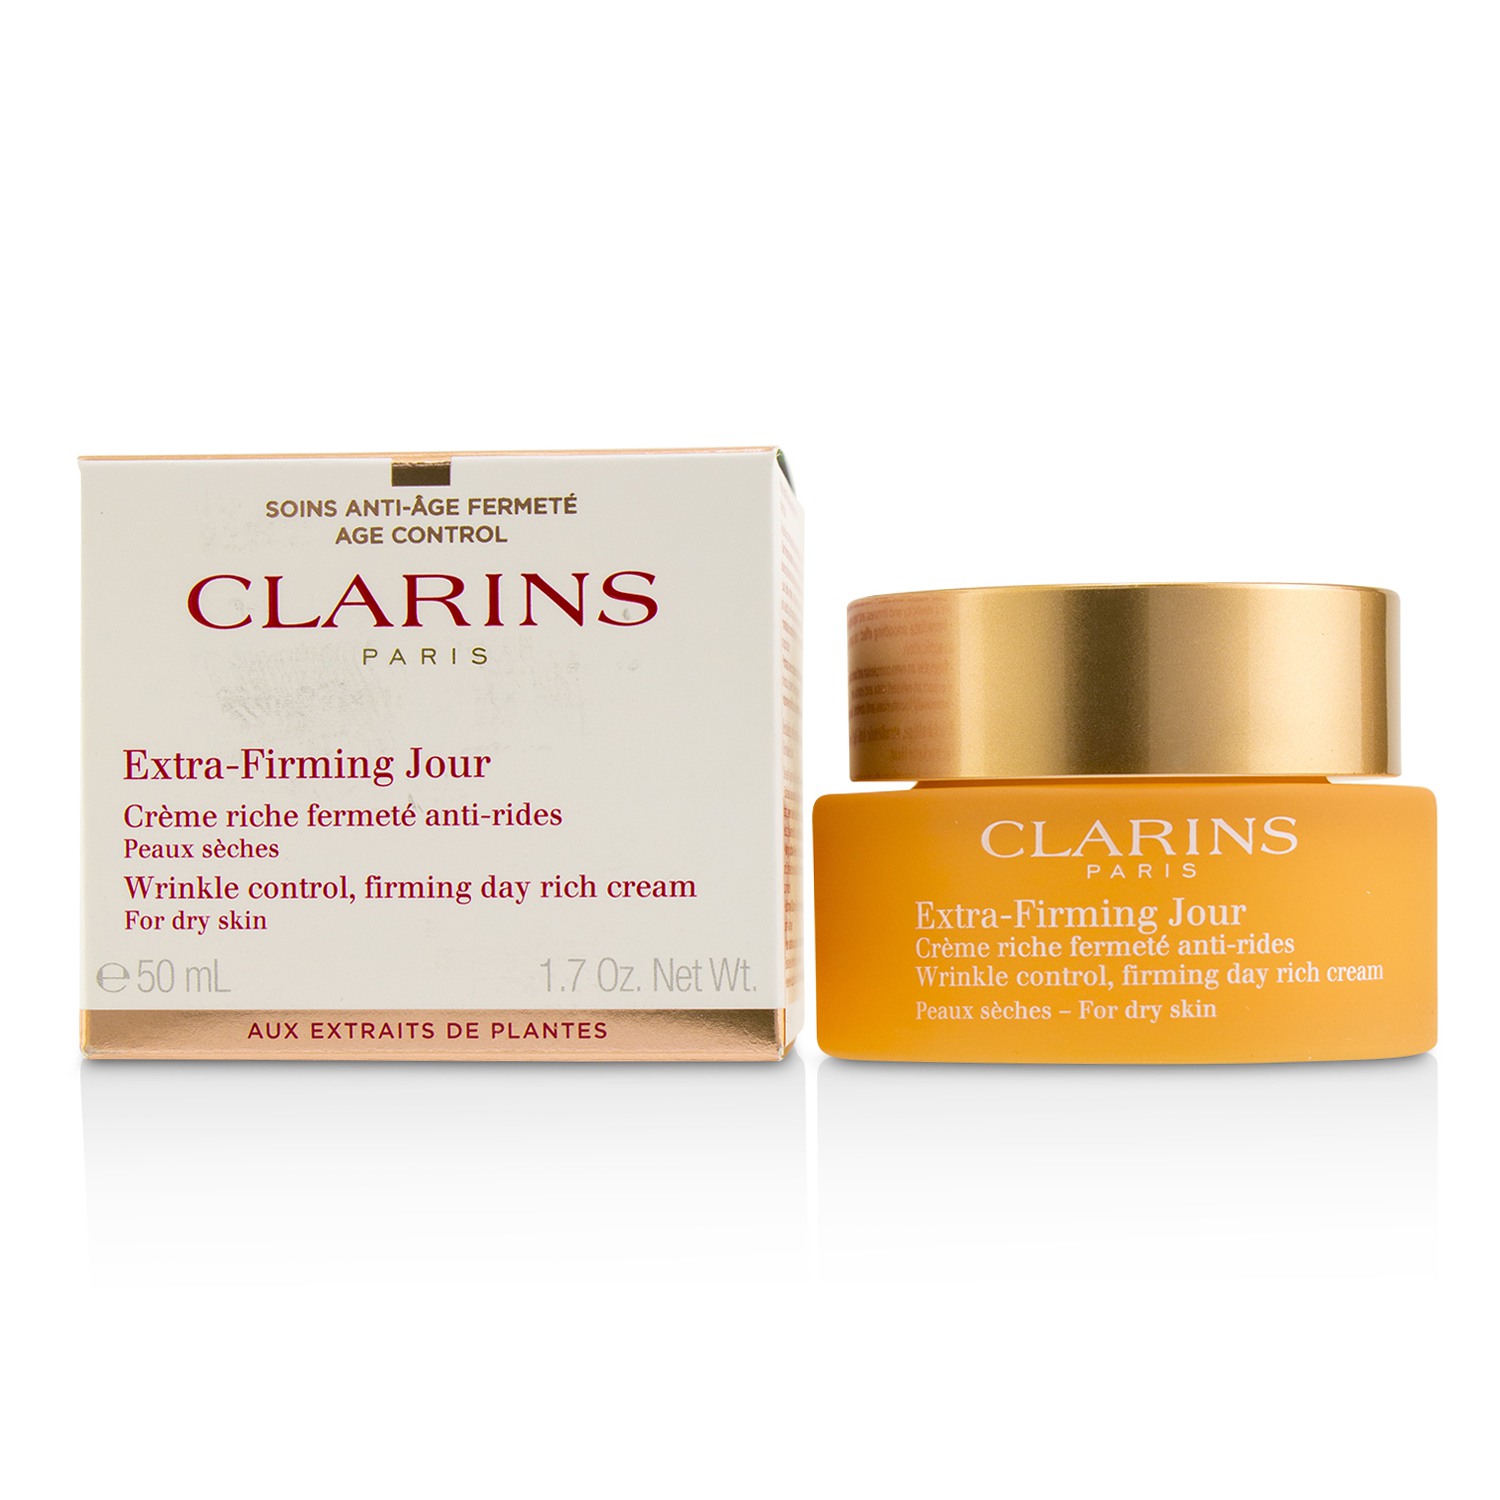 Extra-Firming Jour Wrinkle Control Firming Day Rich Cream - For Dry Skin Clarins Image